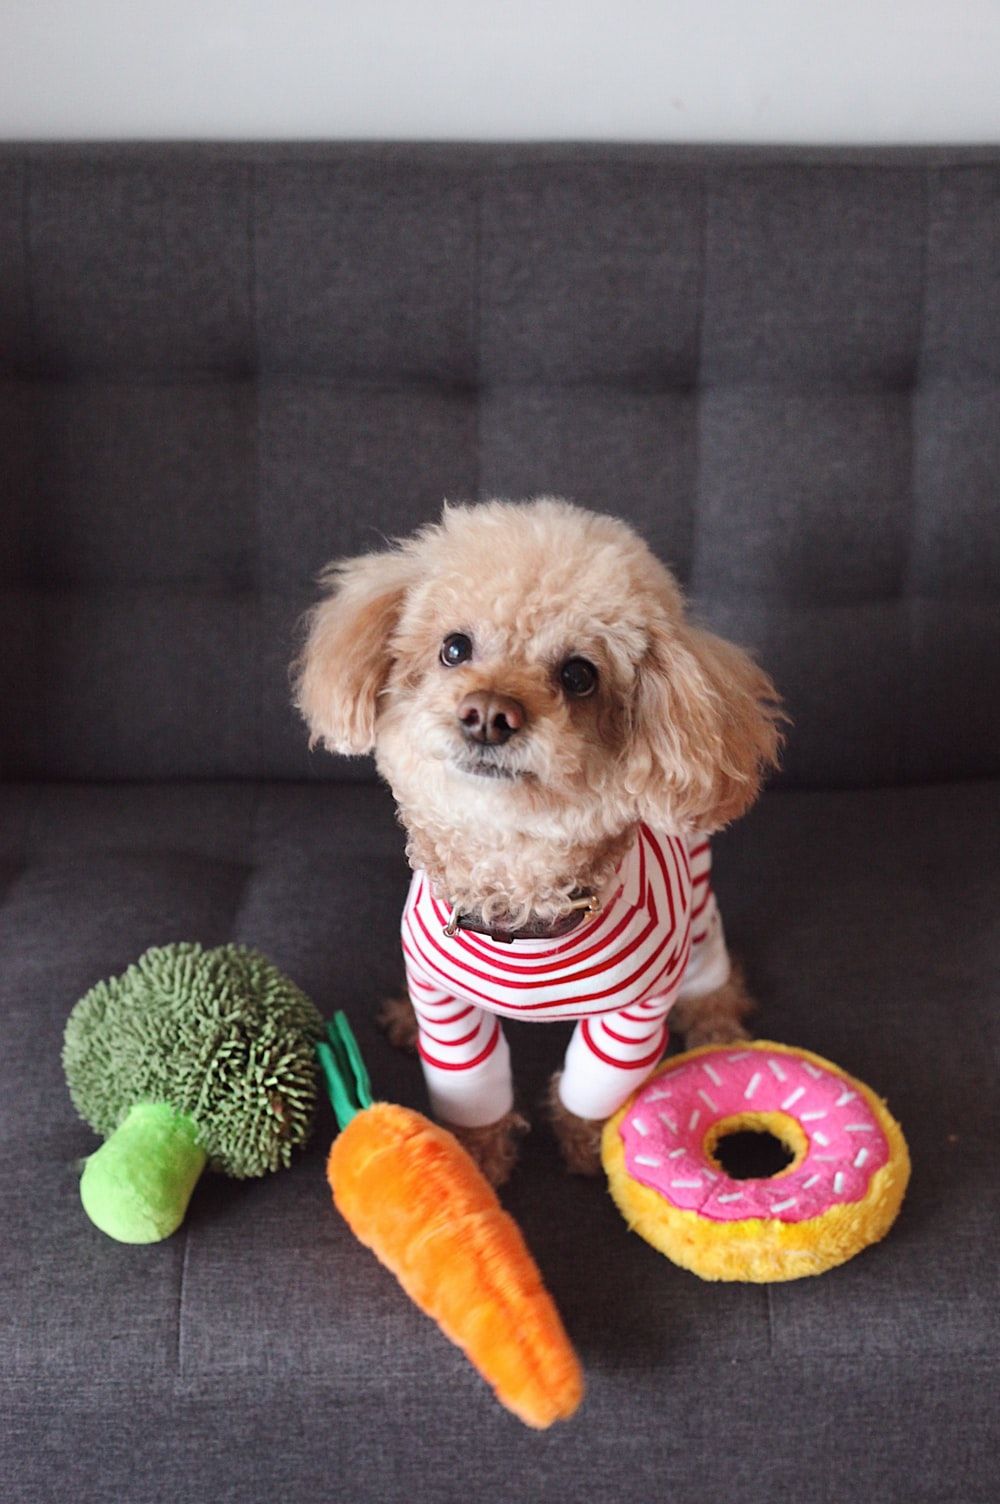 Toy Poodle Picture. Download Free Image